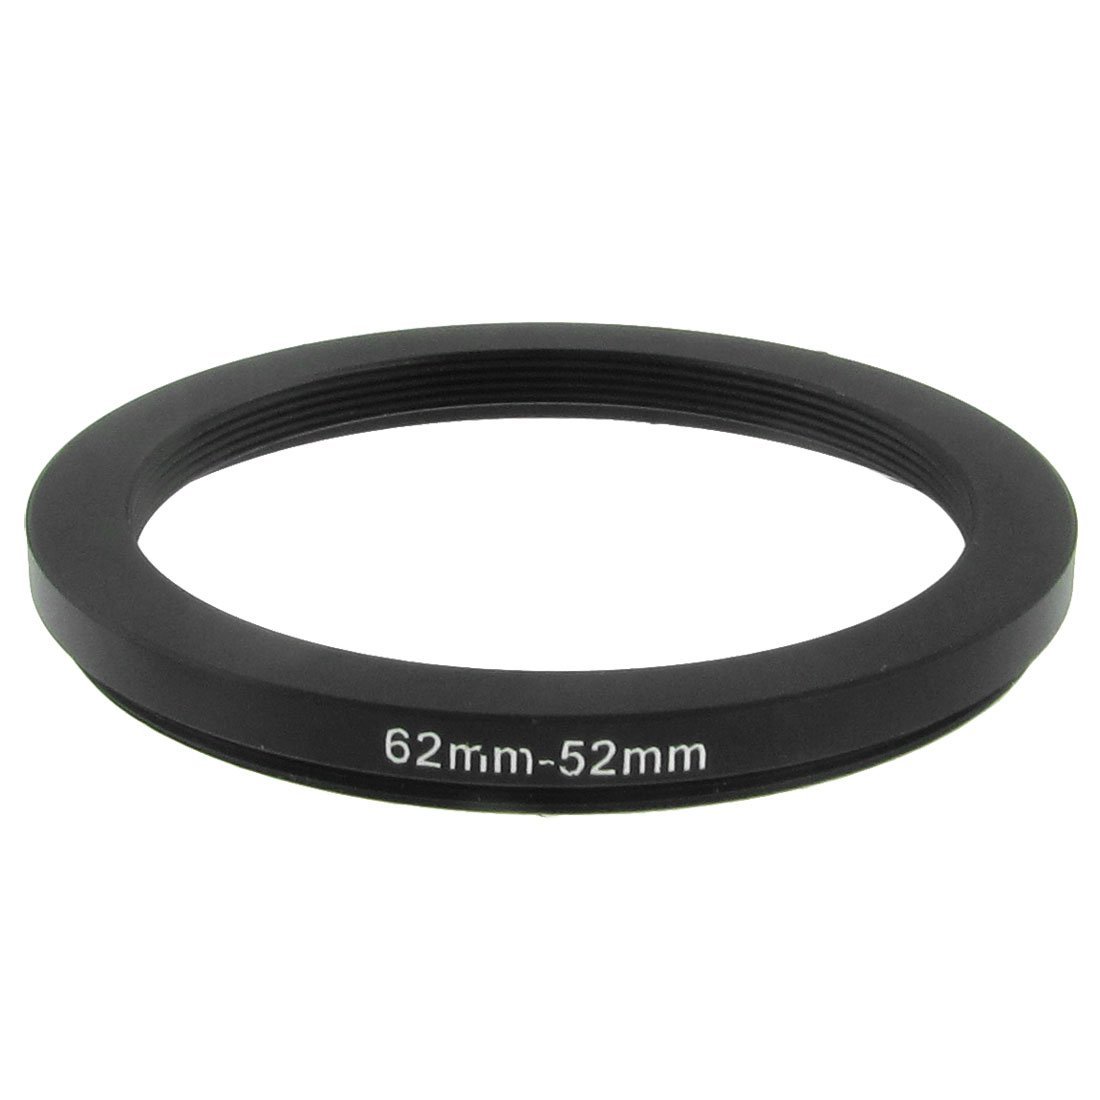 EDT-62mm-52mm